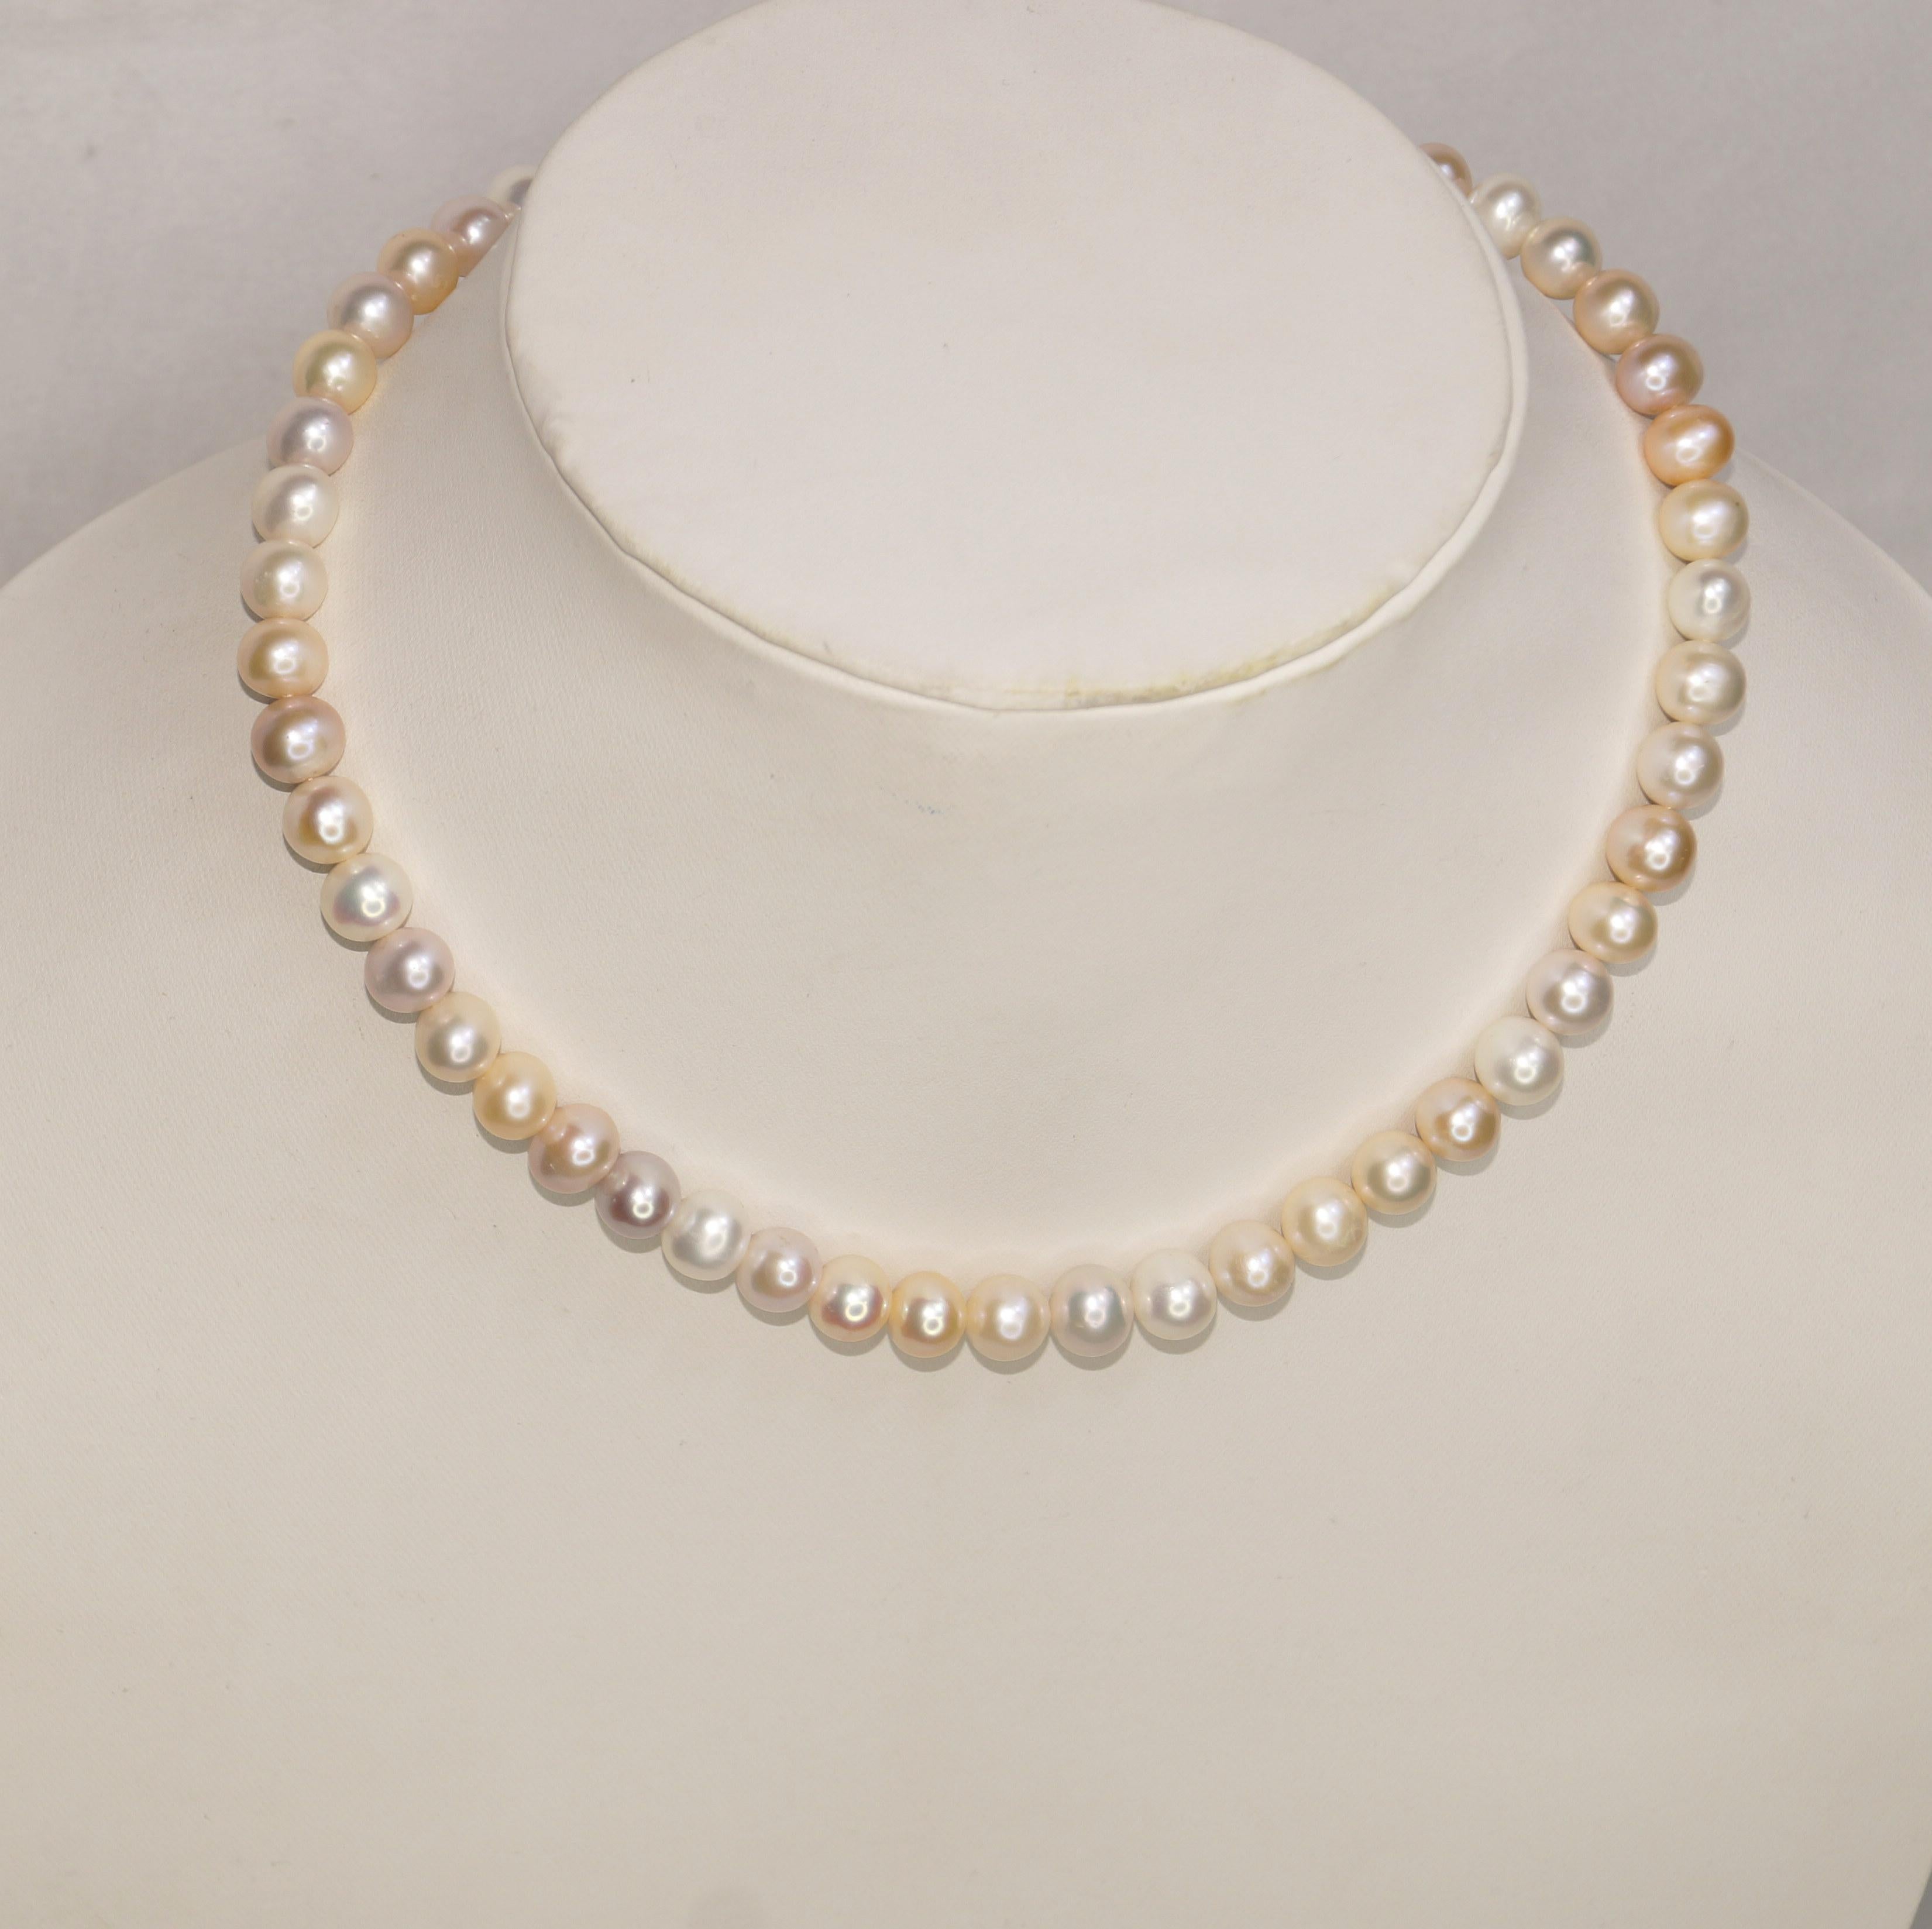 14k Gold Golden Cream mix Pearl necklace 14mm Freshwater Round Pearl necklace 1